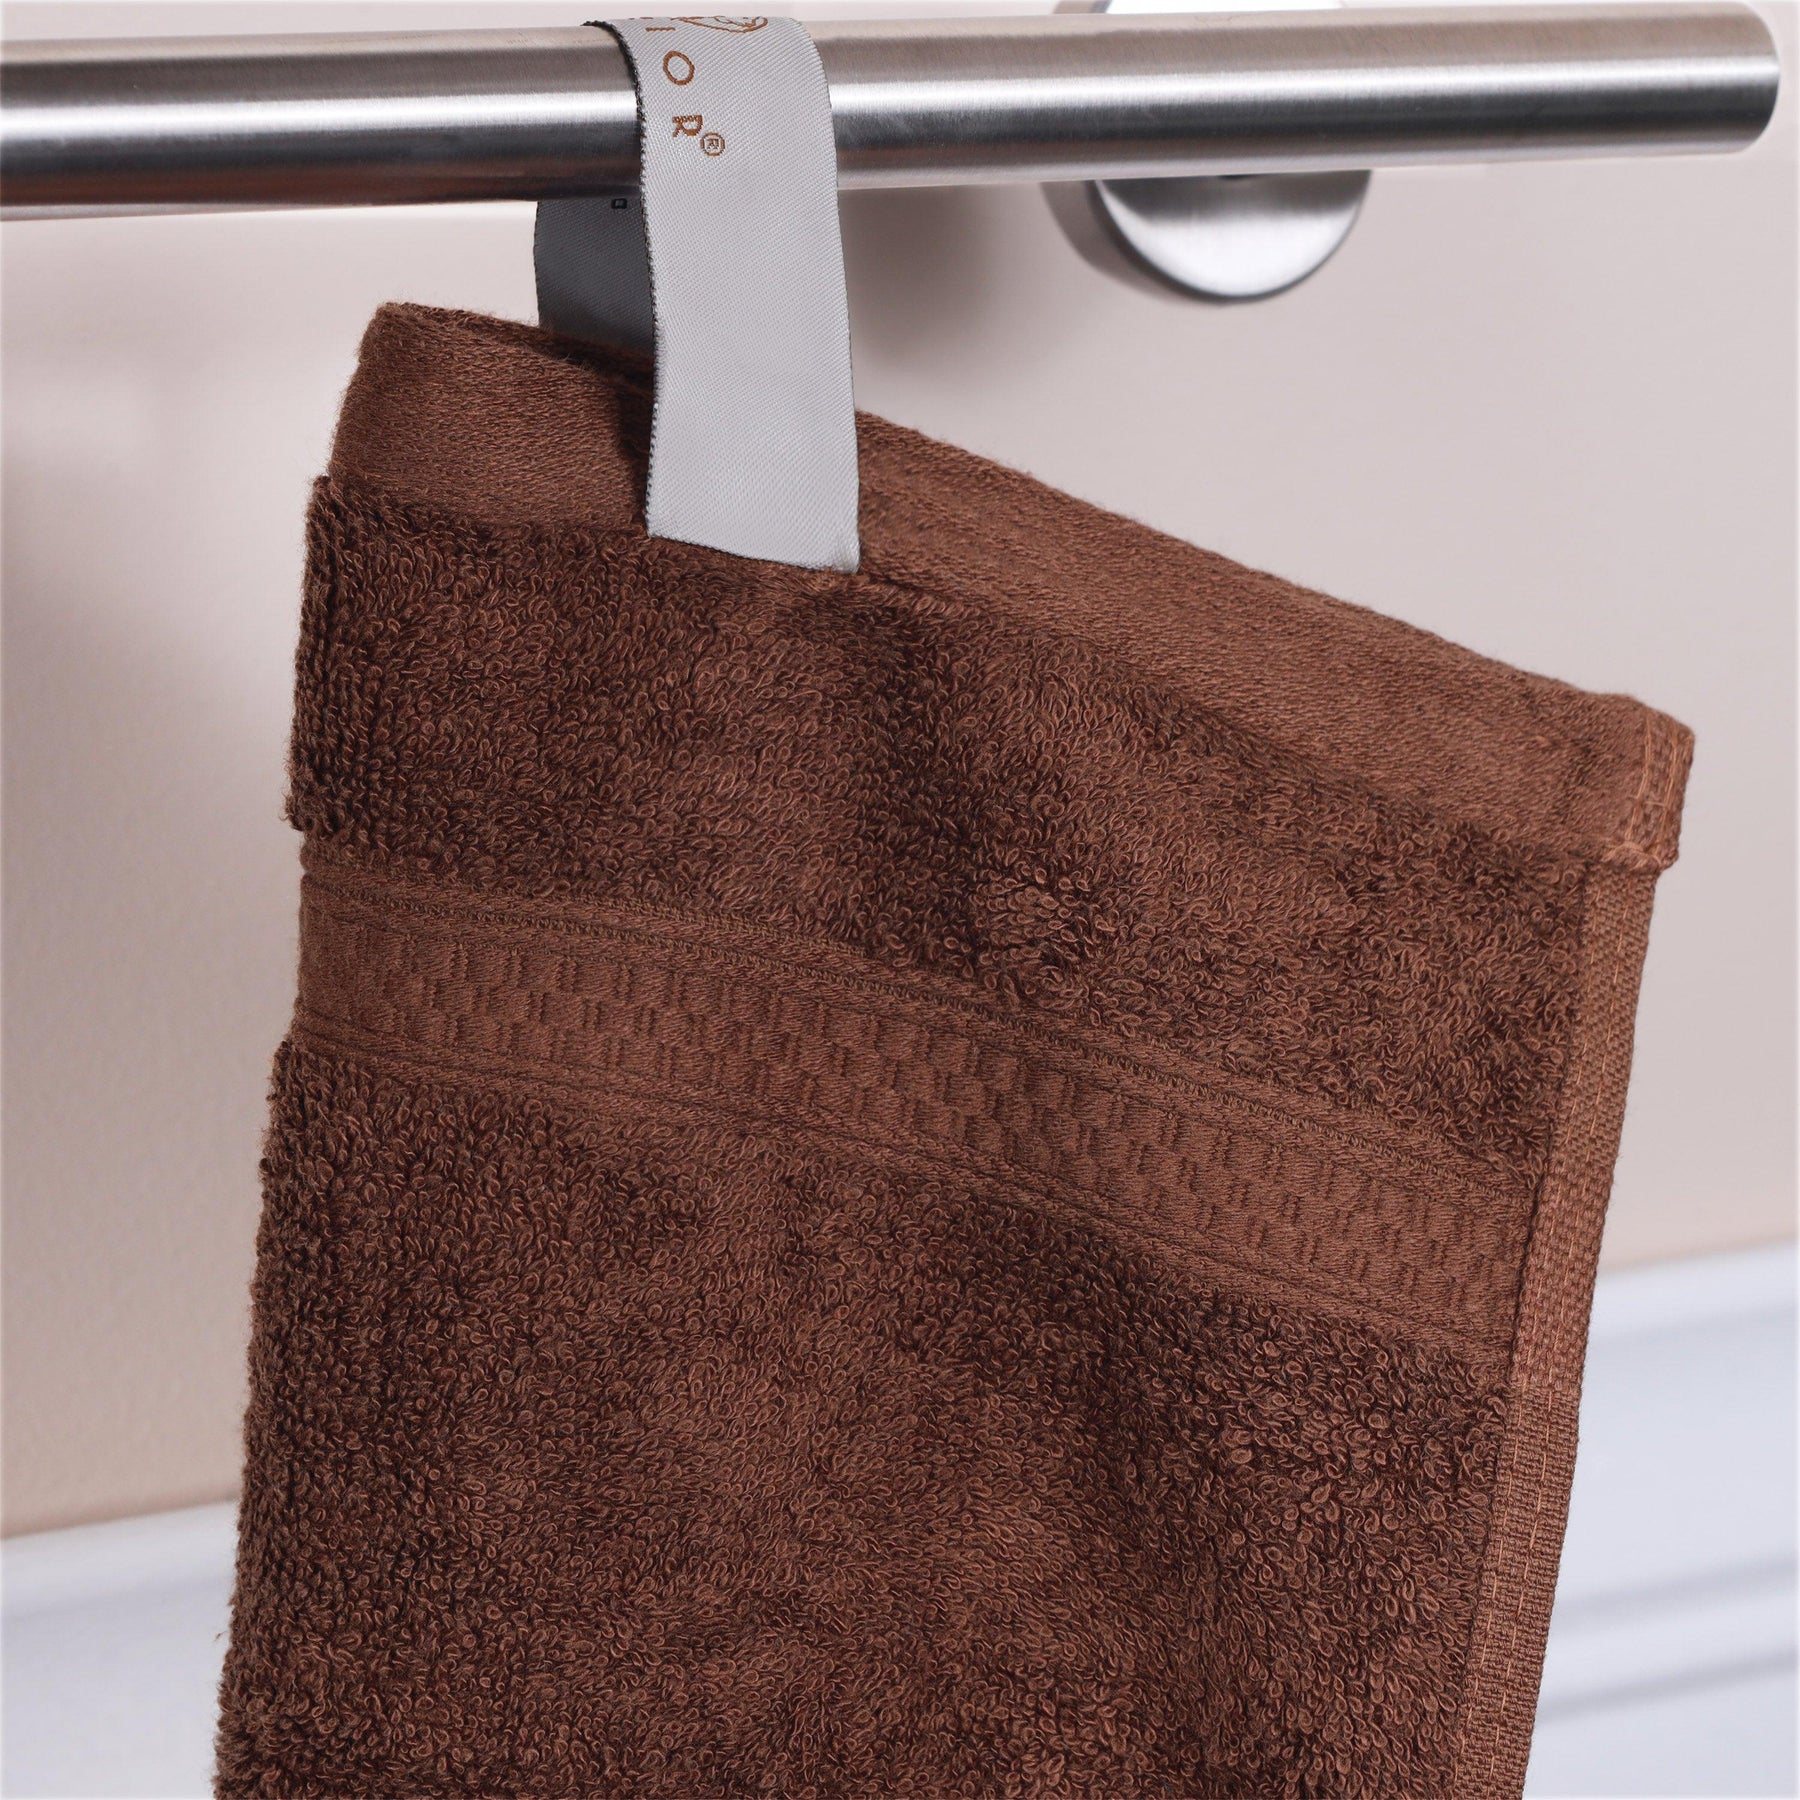 Rayon from Bamboo Ultra-Plush Heavyweight Assorted 12-Piece Towel Set - Cocoa